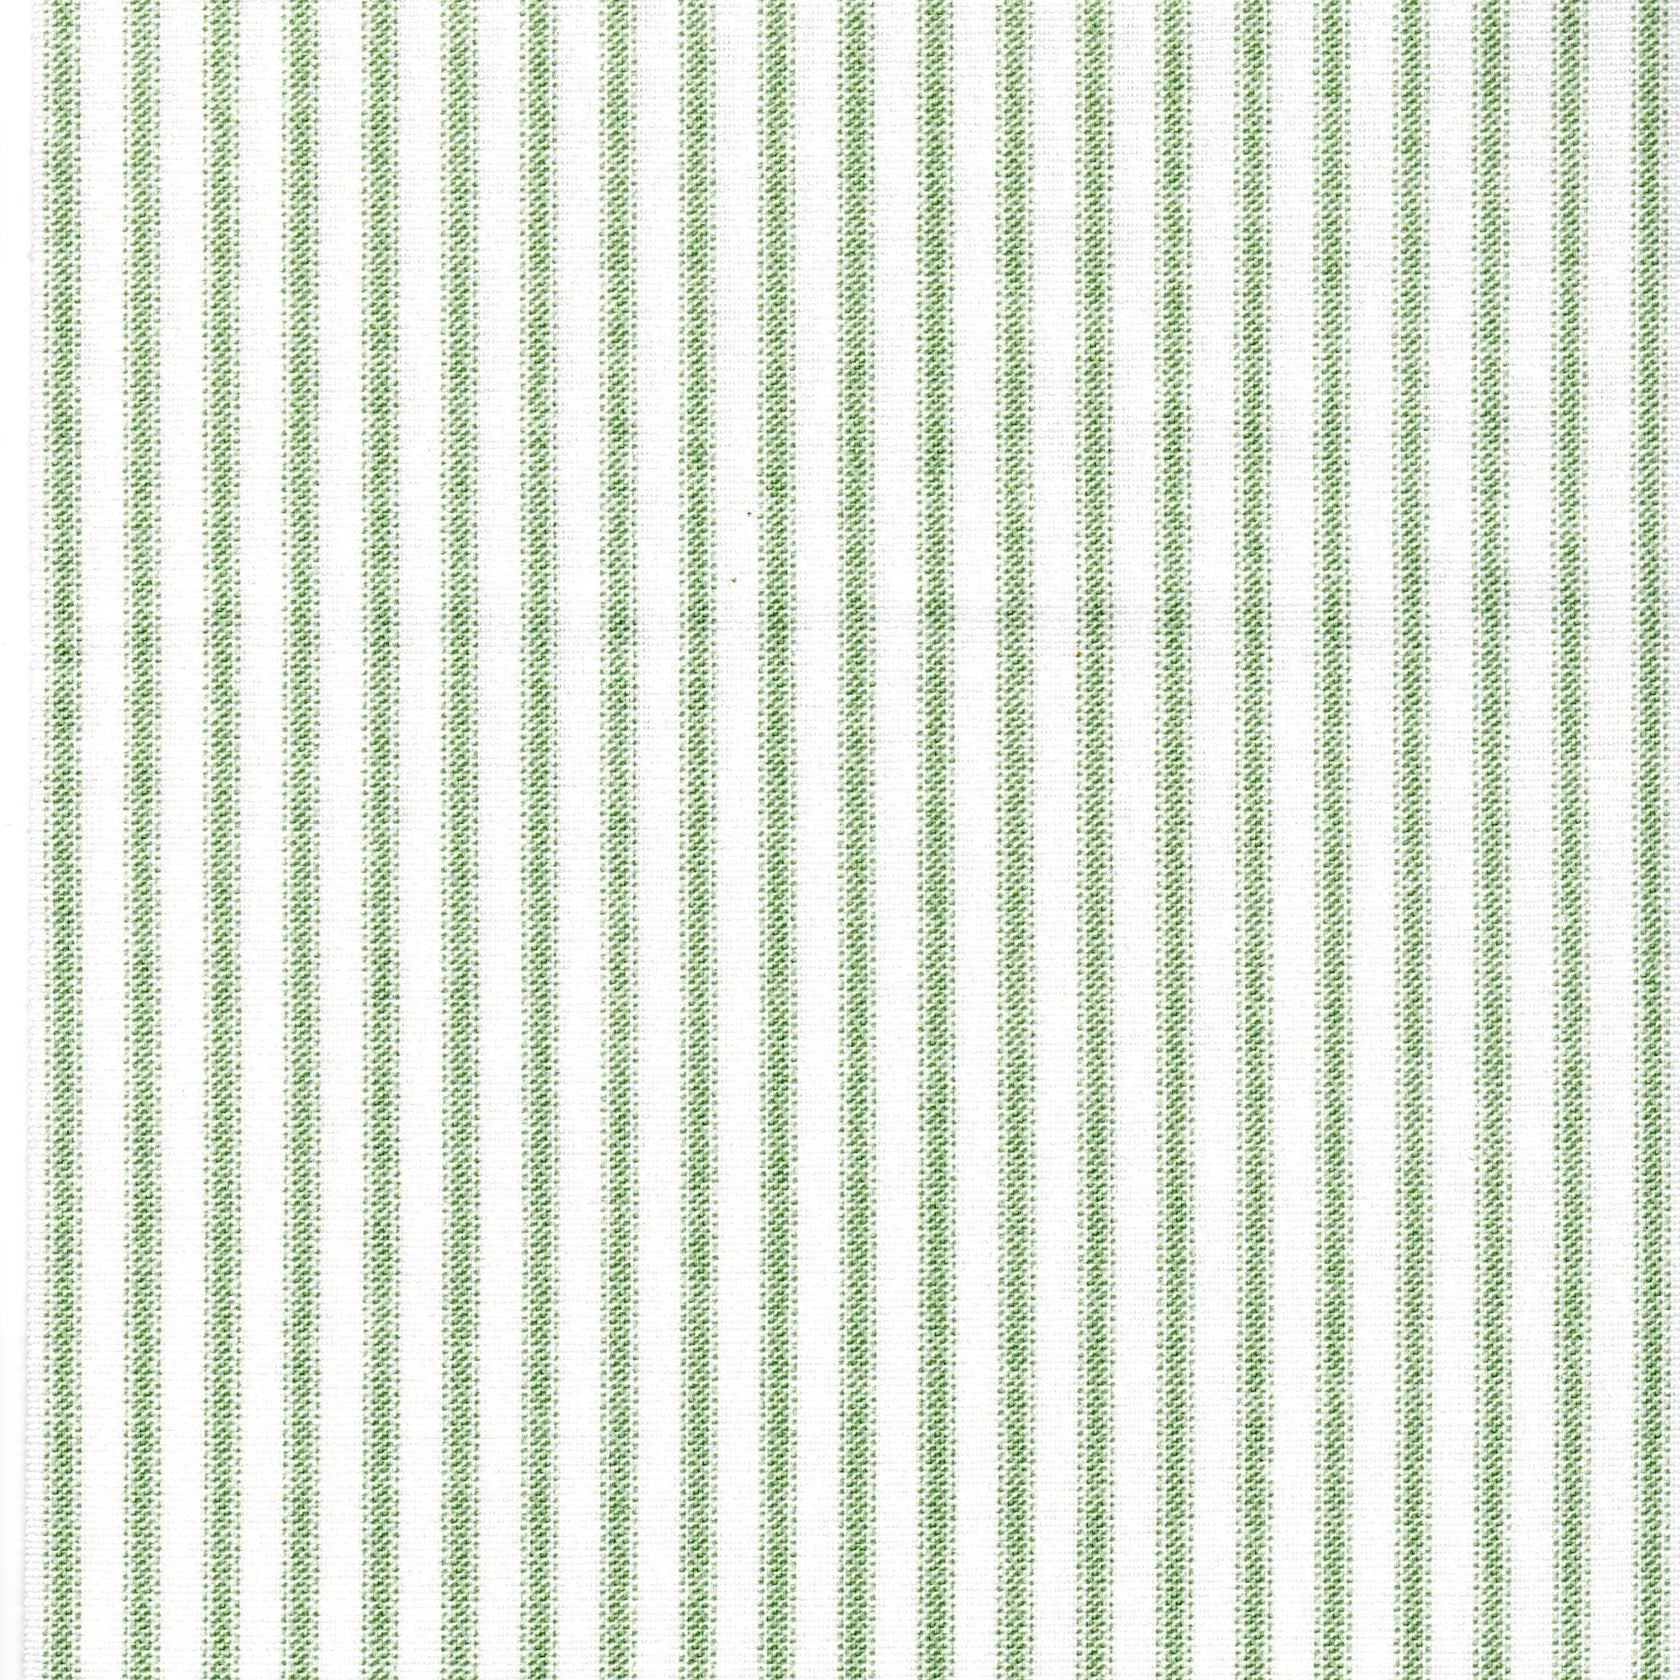 tailored bedskirt in Classic Sage Green Ticking Stripe on White